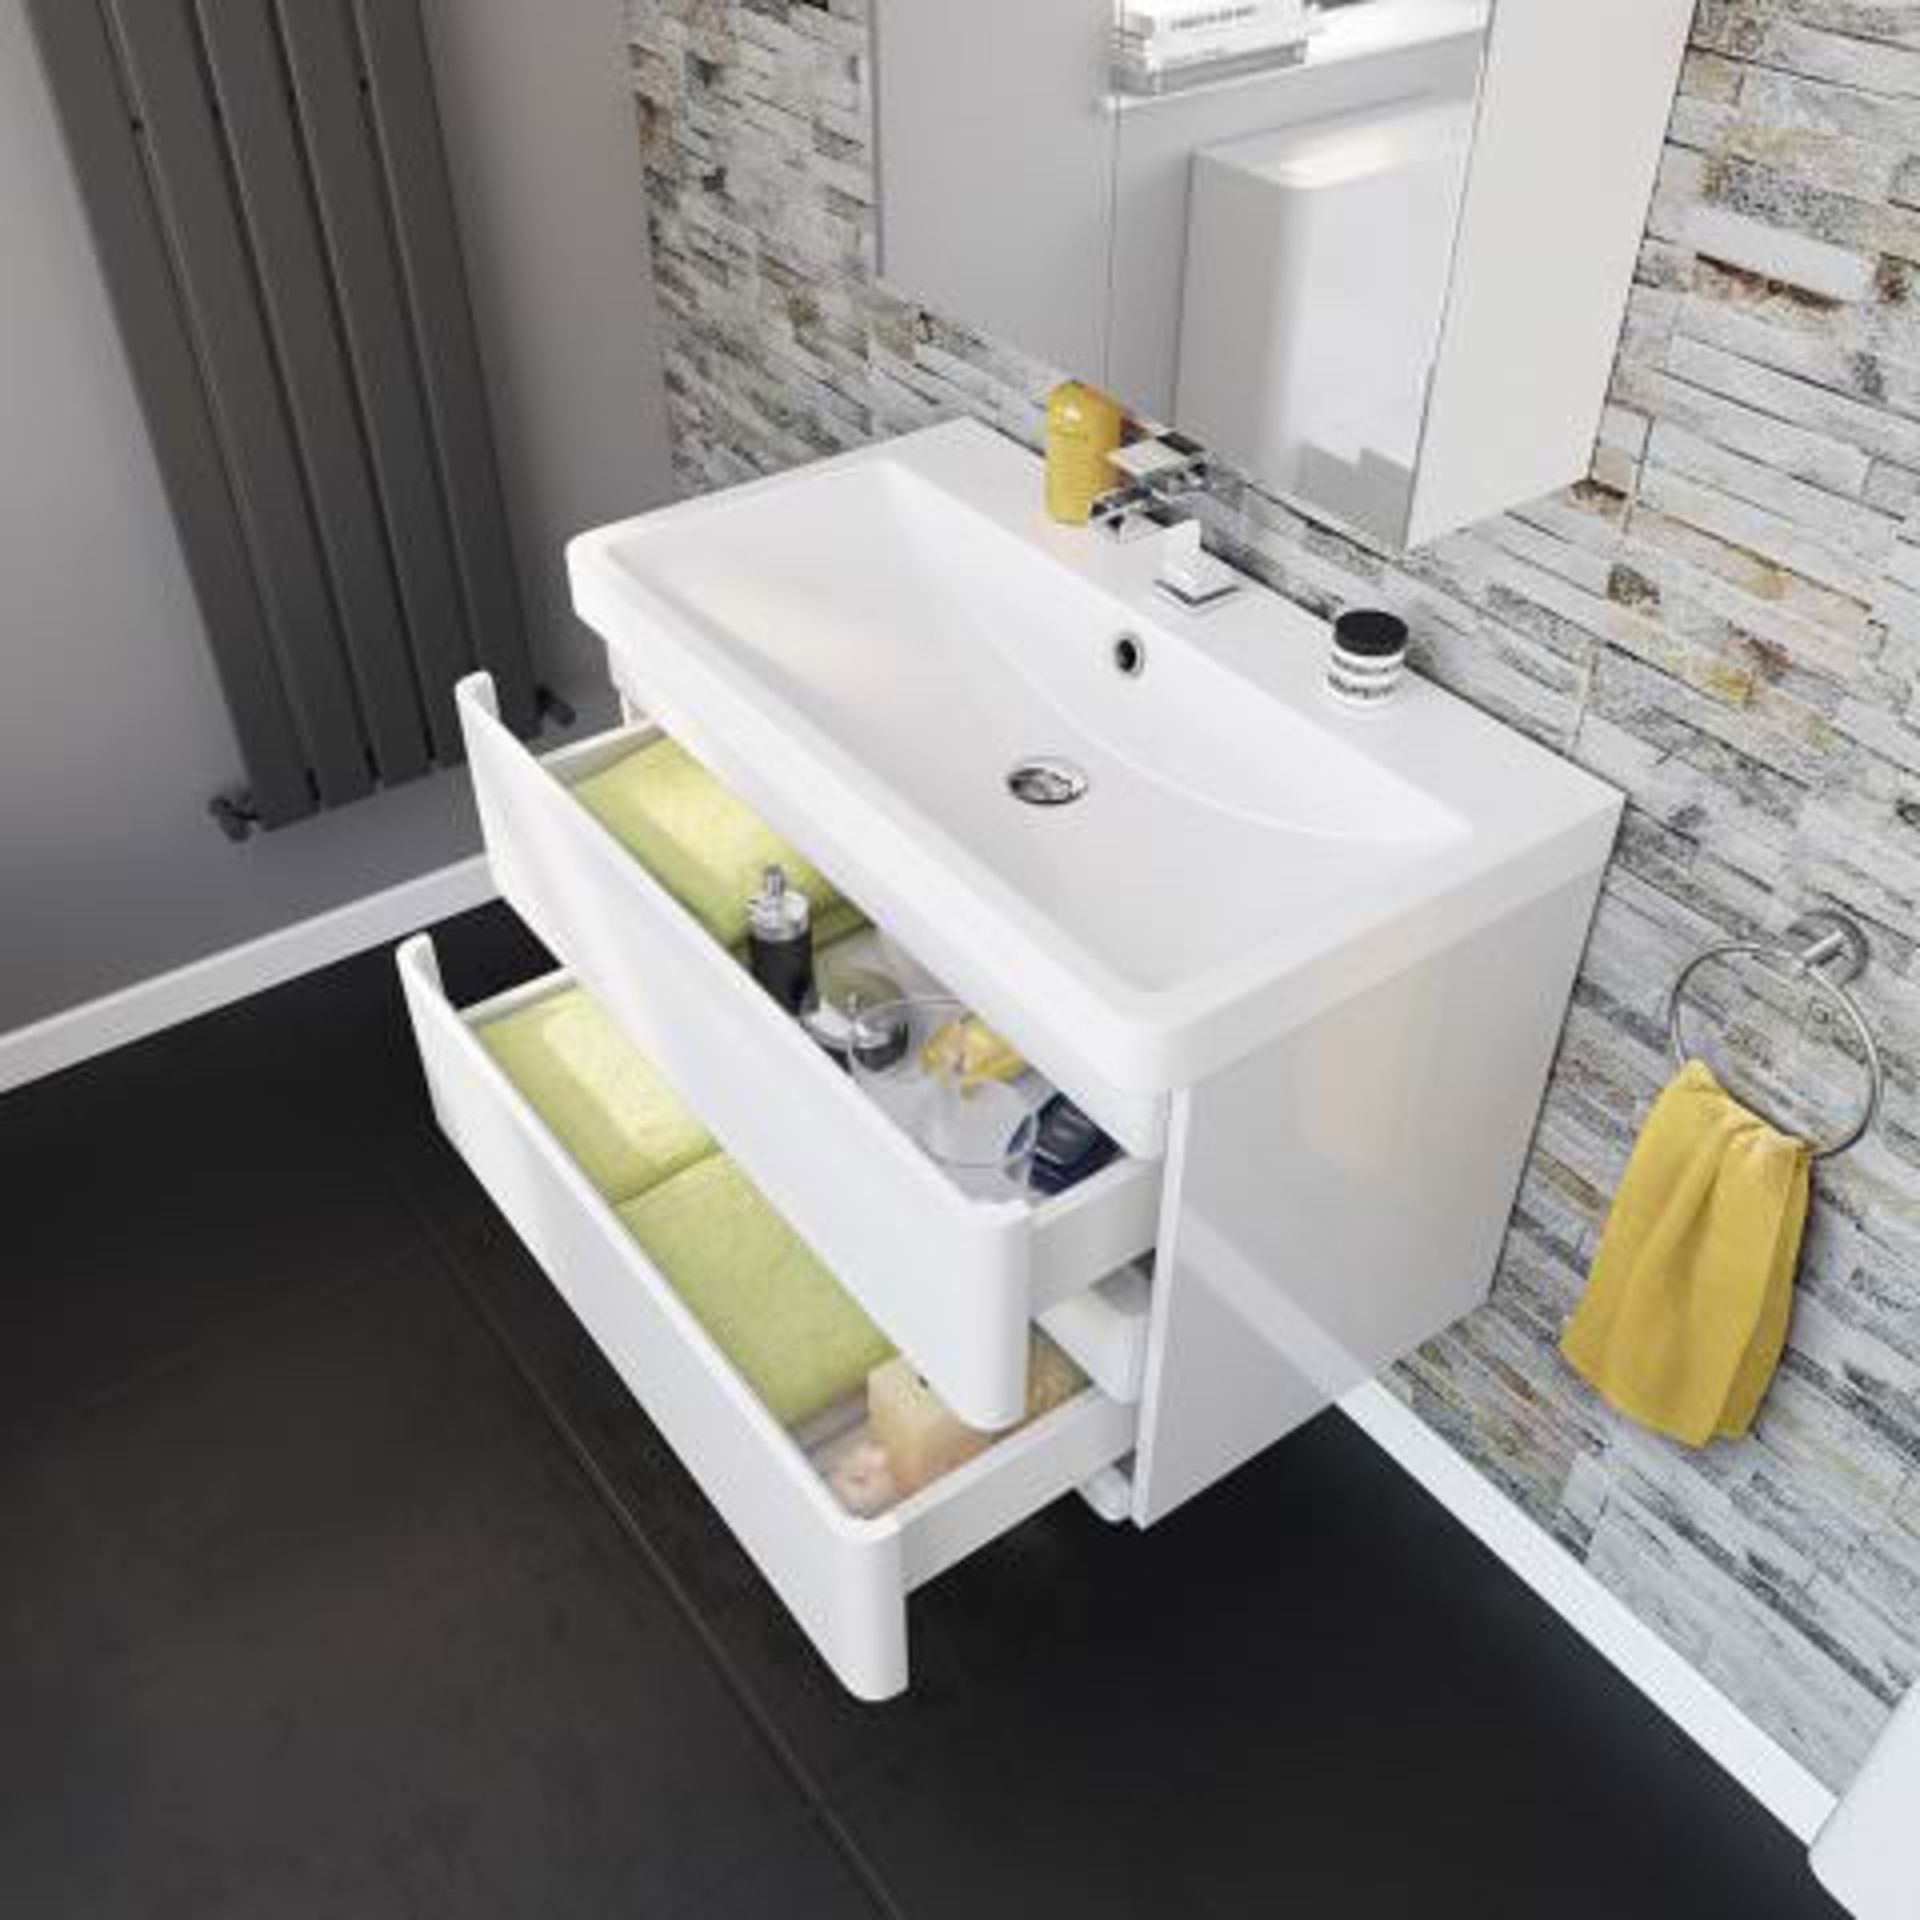 (I93) 800mm Denver II Gloss White Built In Basin Drawer Unit - Wall Hung RRP £499.99. COMES COMPLETE - Image 3 of 4